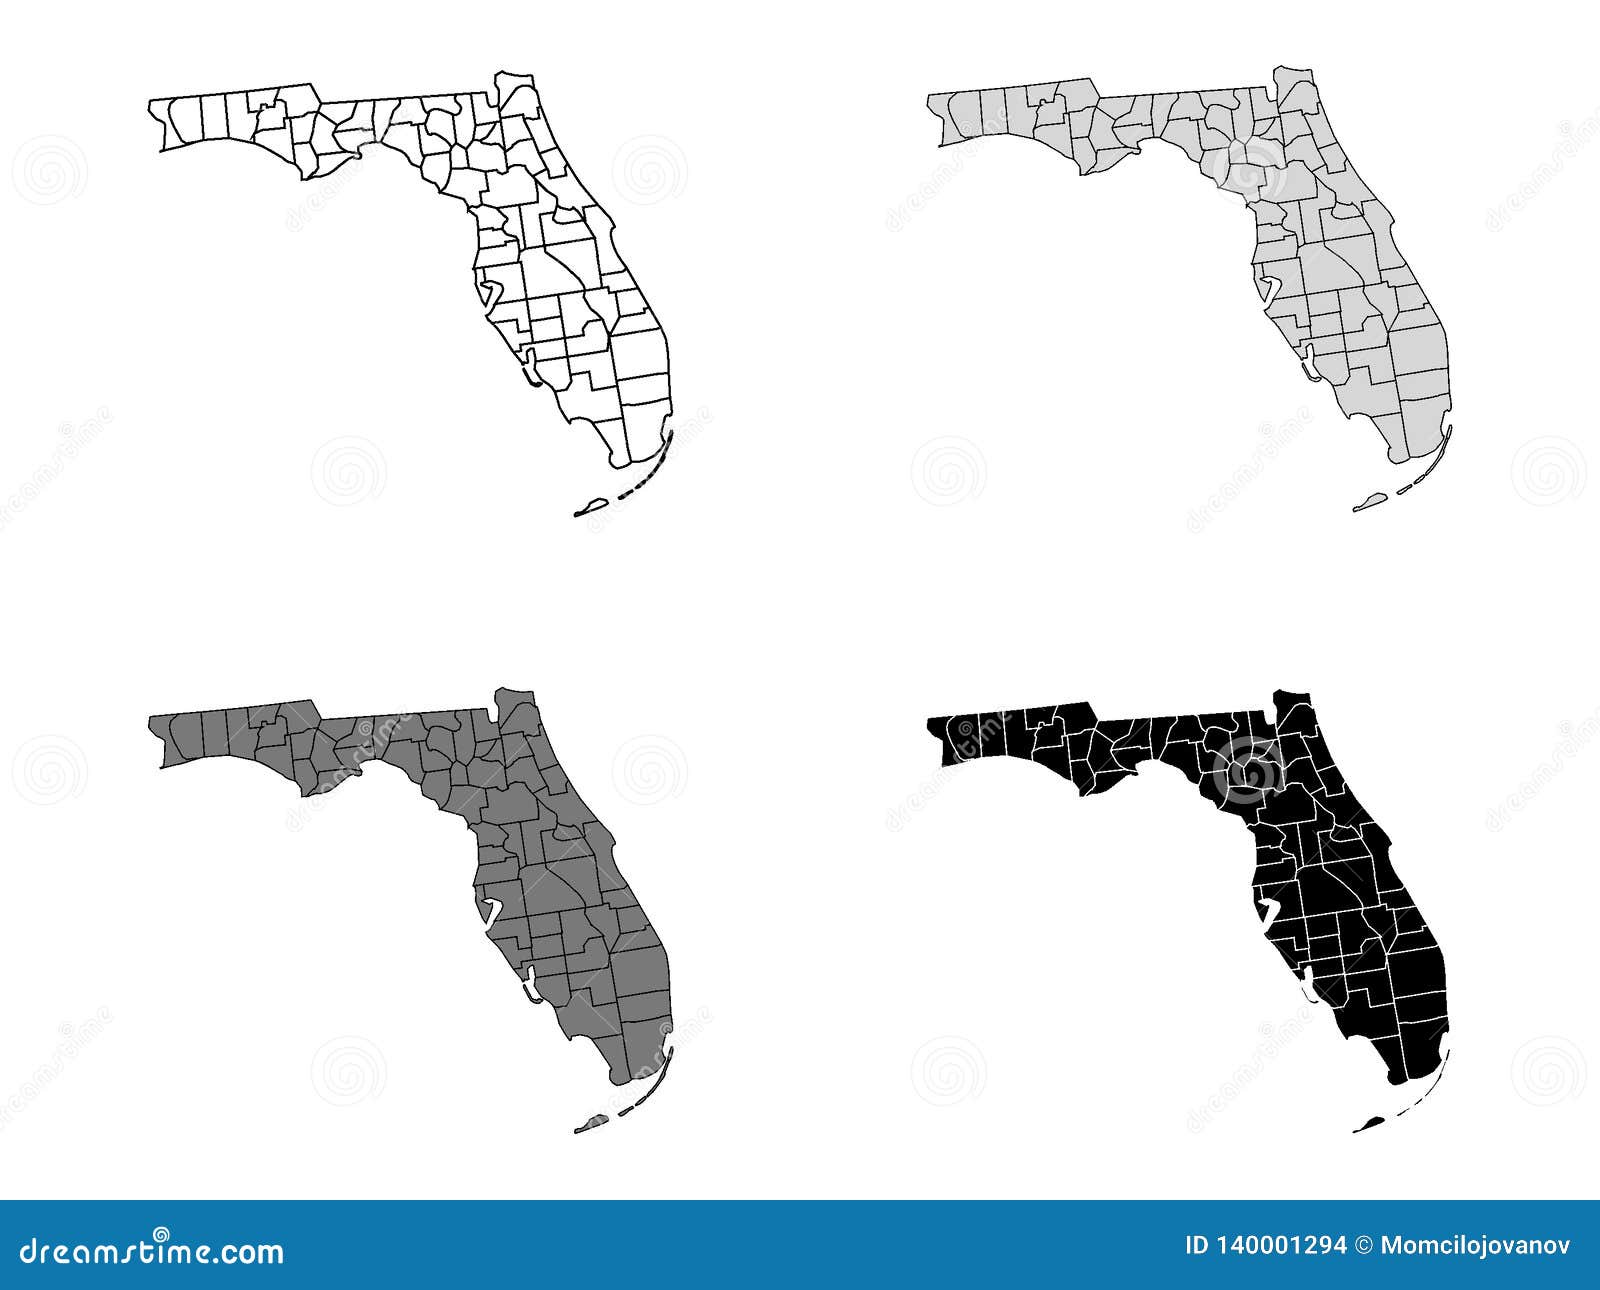 set of counties maps of us state of florida